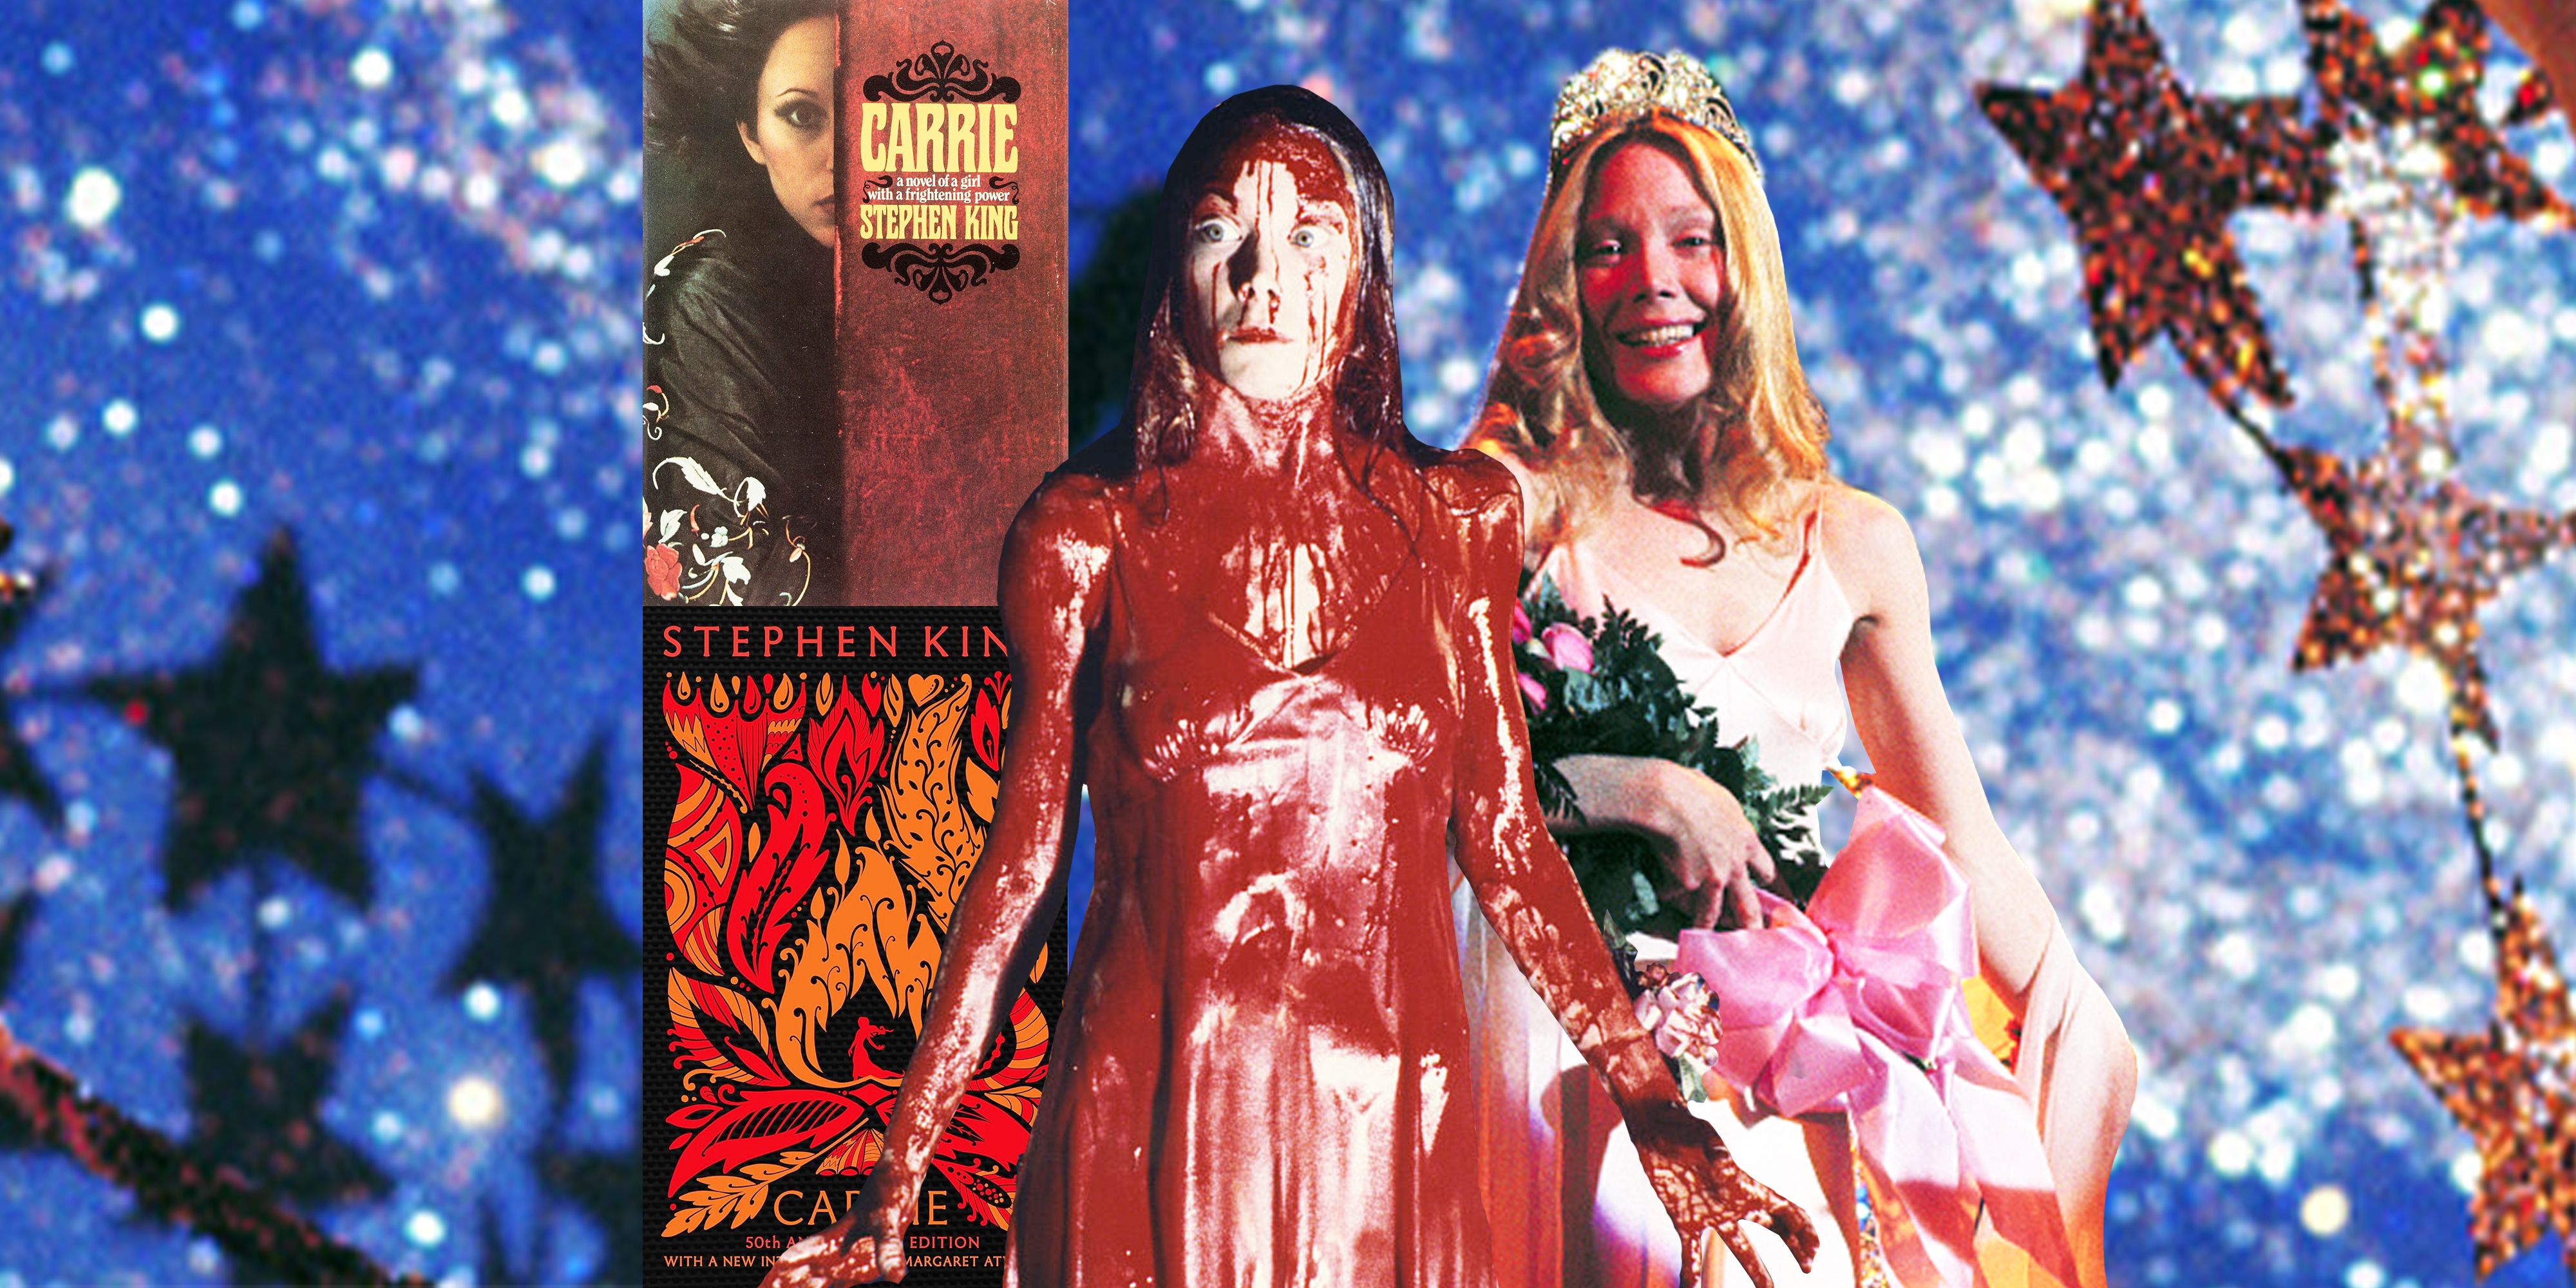 The Enduring Legacy of 'Carrie' and Stephen King